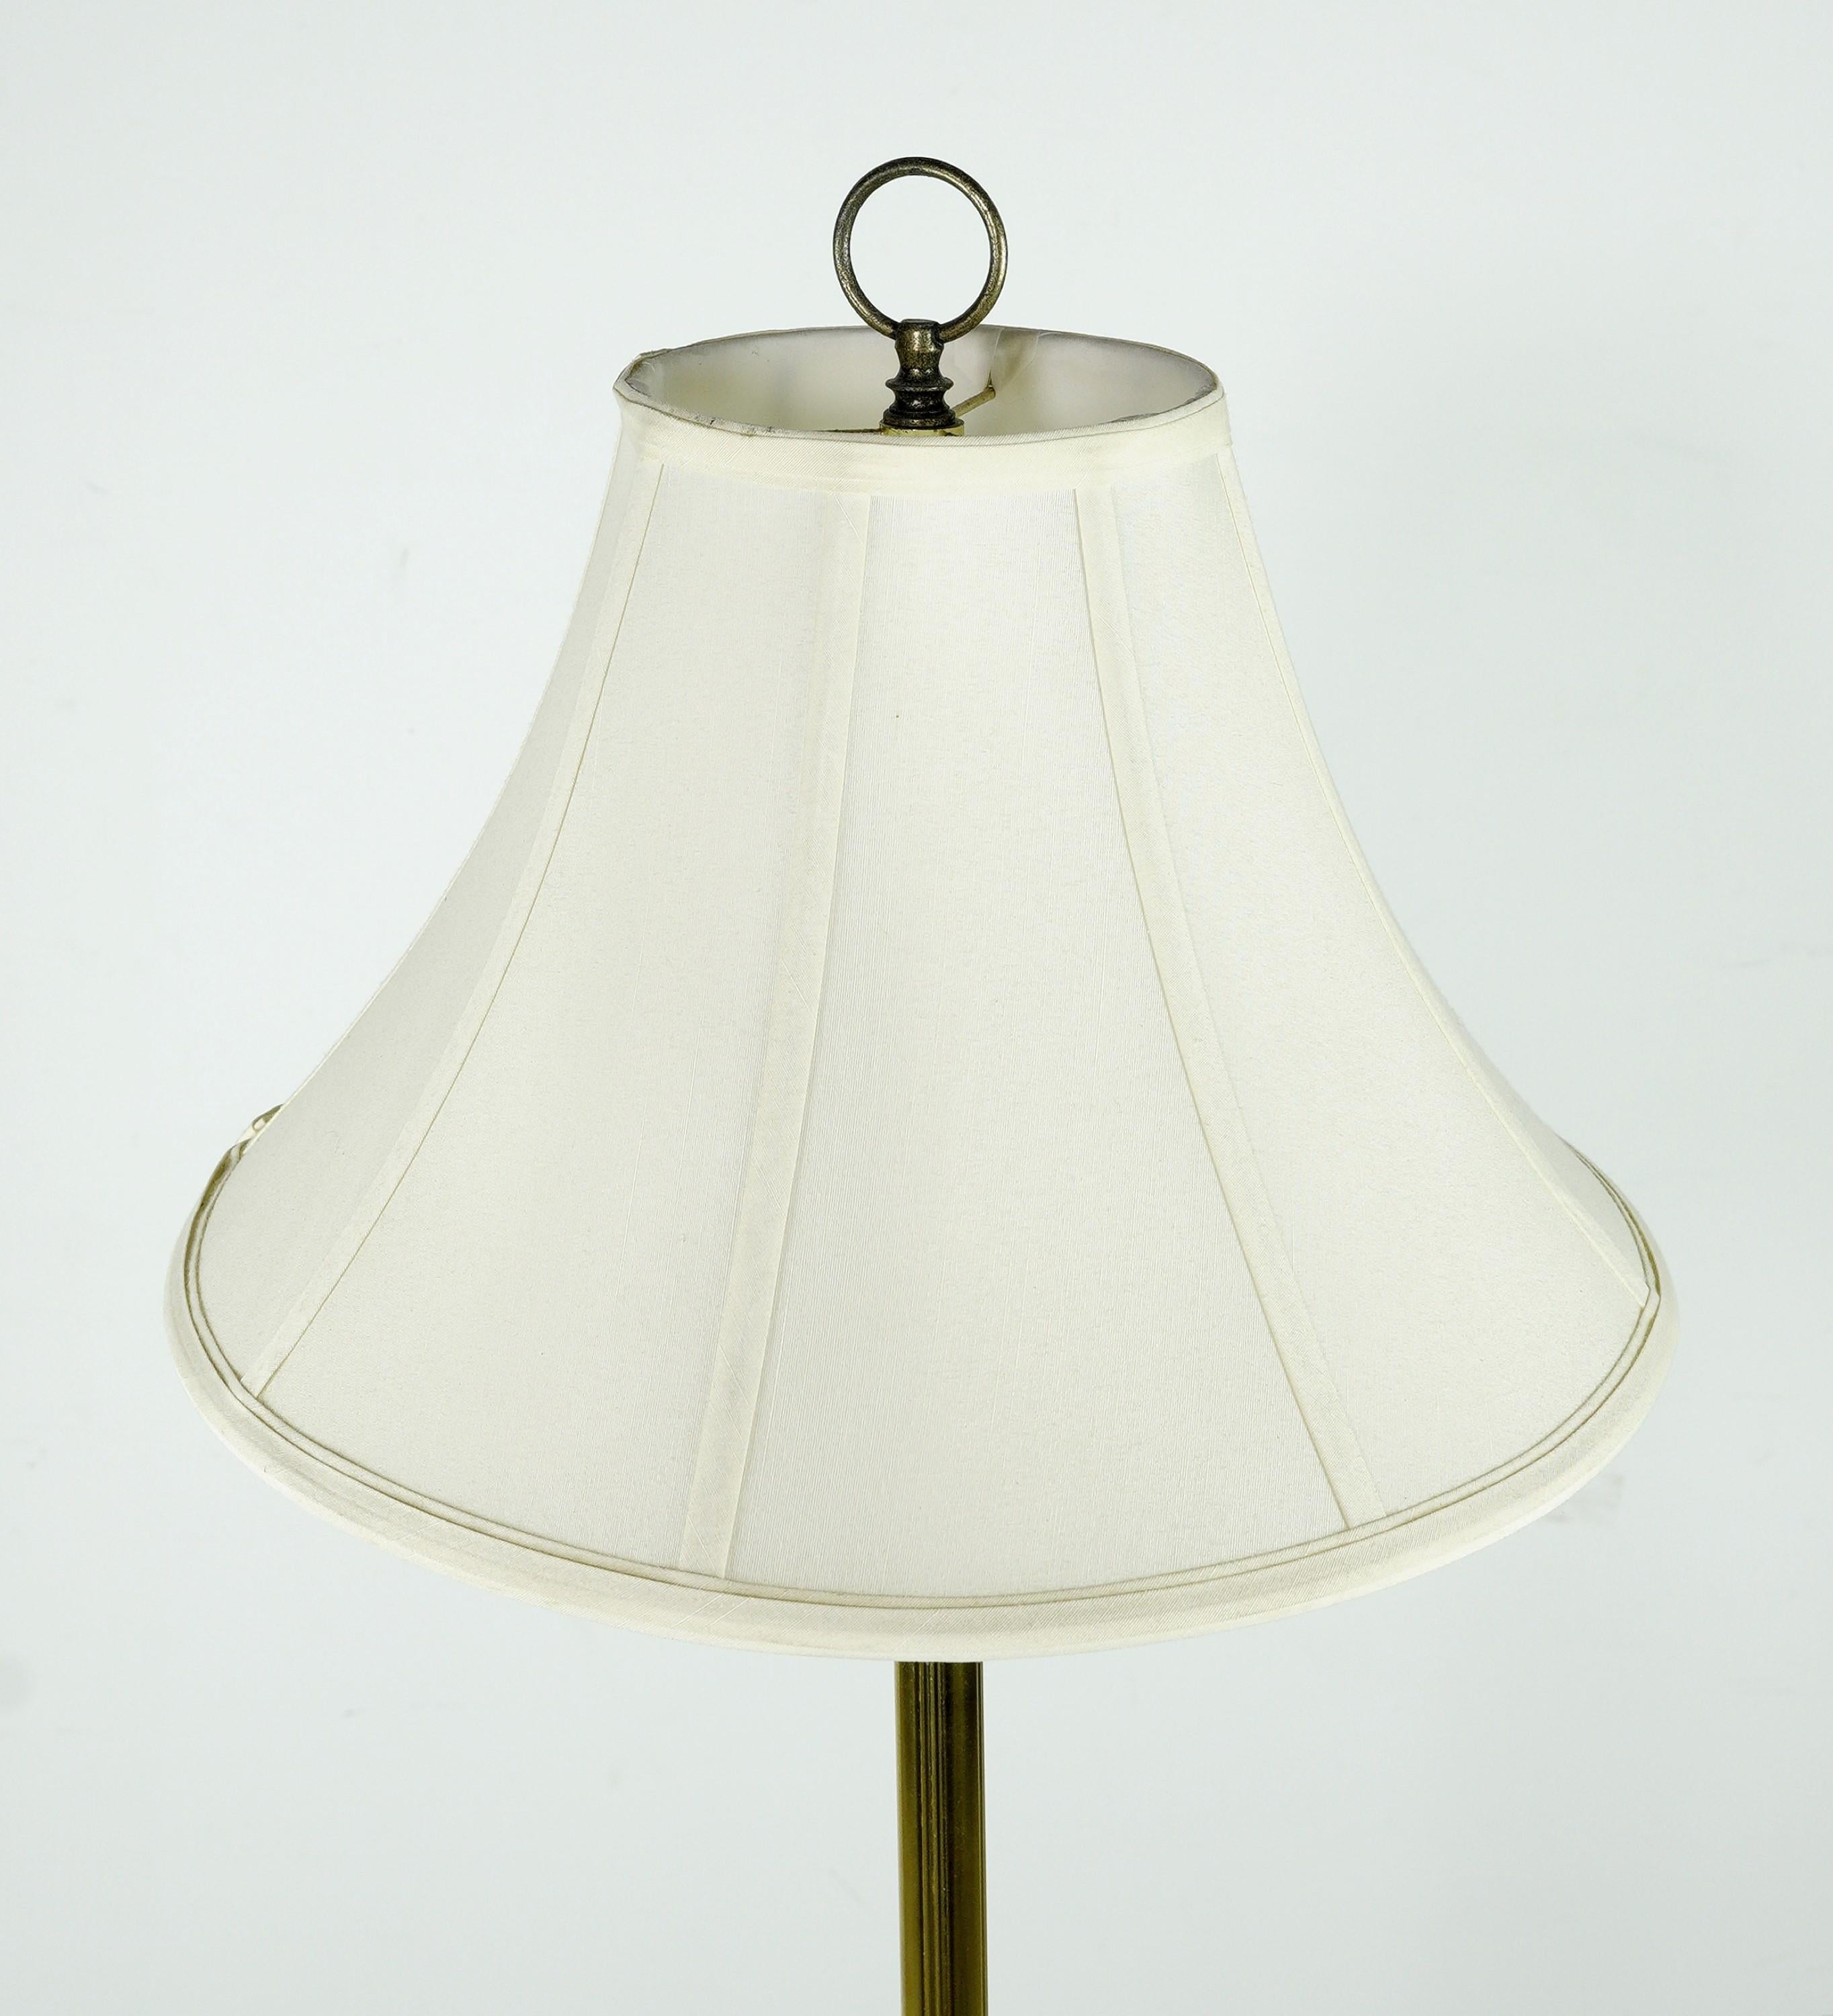 Mid-Century Modern style floor lamp having an antique brass finish. Features a center glass circular glass tabletop and the original white shade. Takes one standard medium base light bulb. Cleaned and restored. Original patina on the antique brass